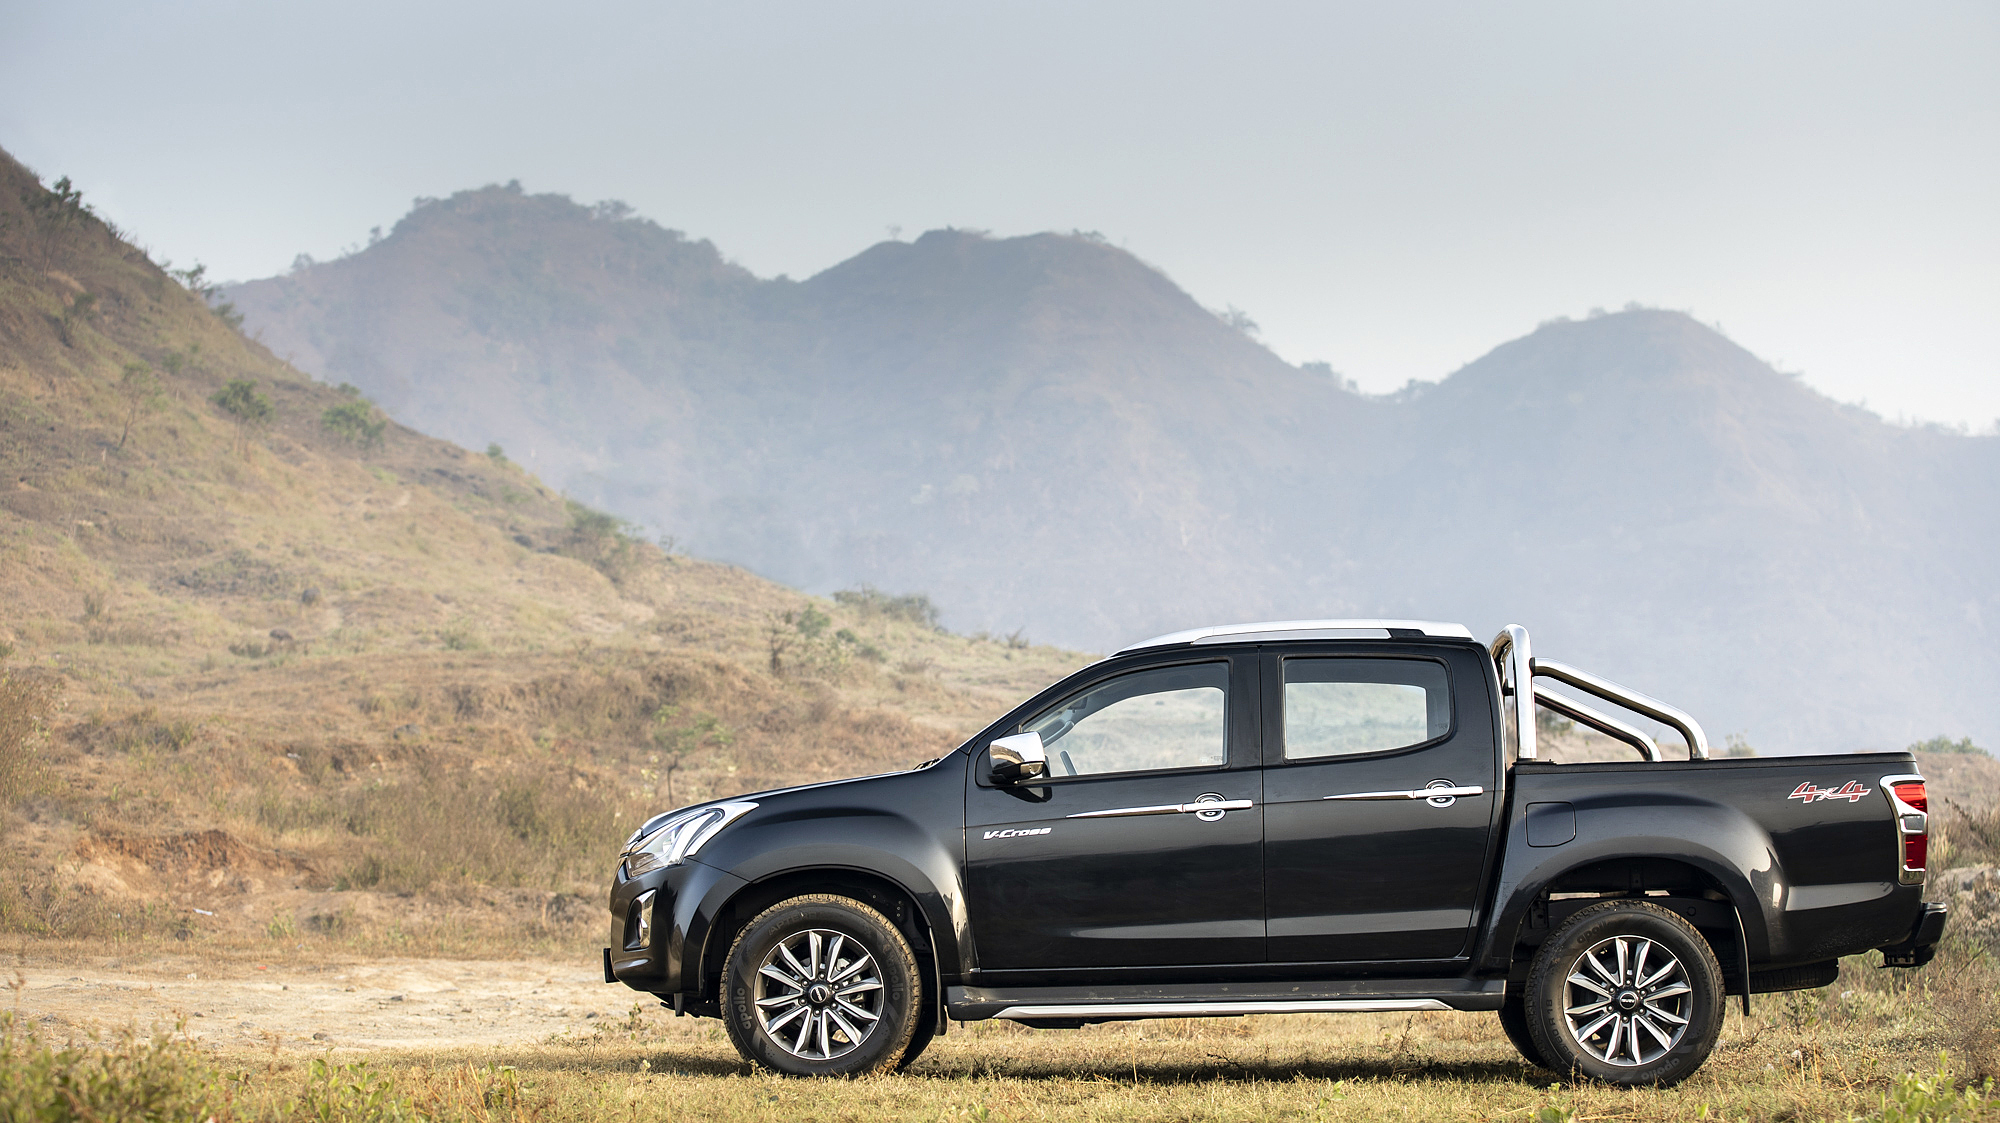 Isuzu D-Max Hi-Lander (D-Max Base Model) Price in India - Features, Specs  and Reviews - CarWale